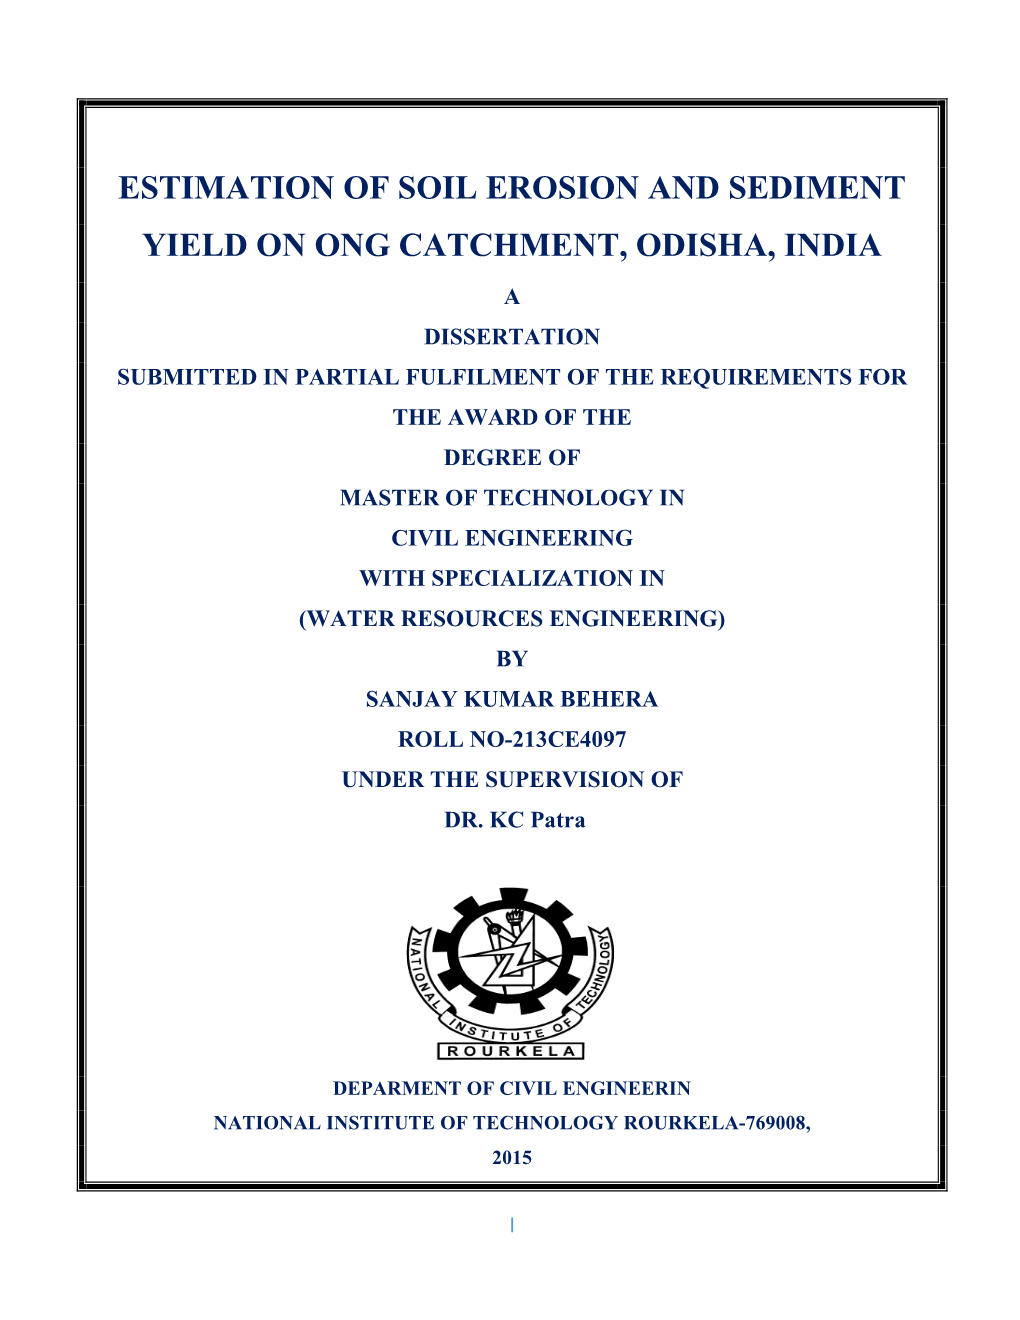 Estimation of Soil Erosion and Sediment Yield on Ong